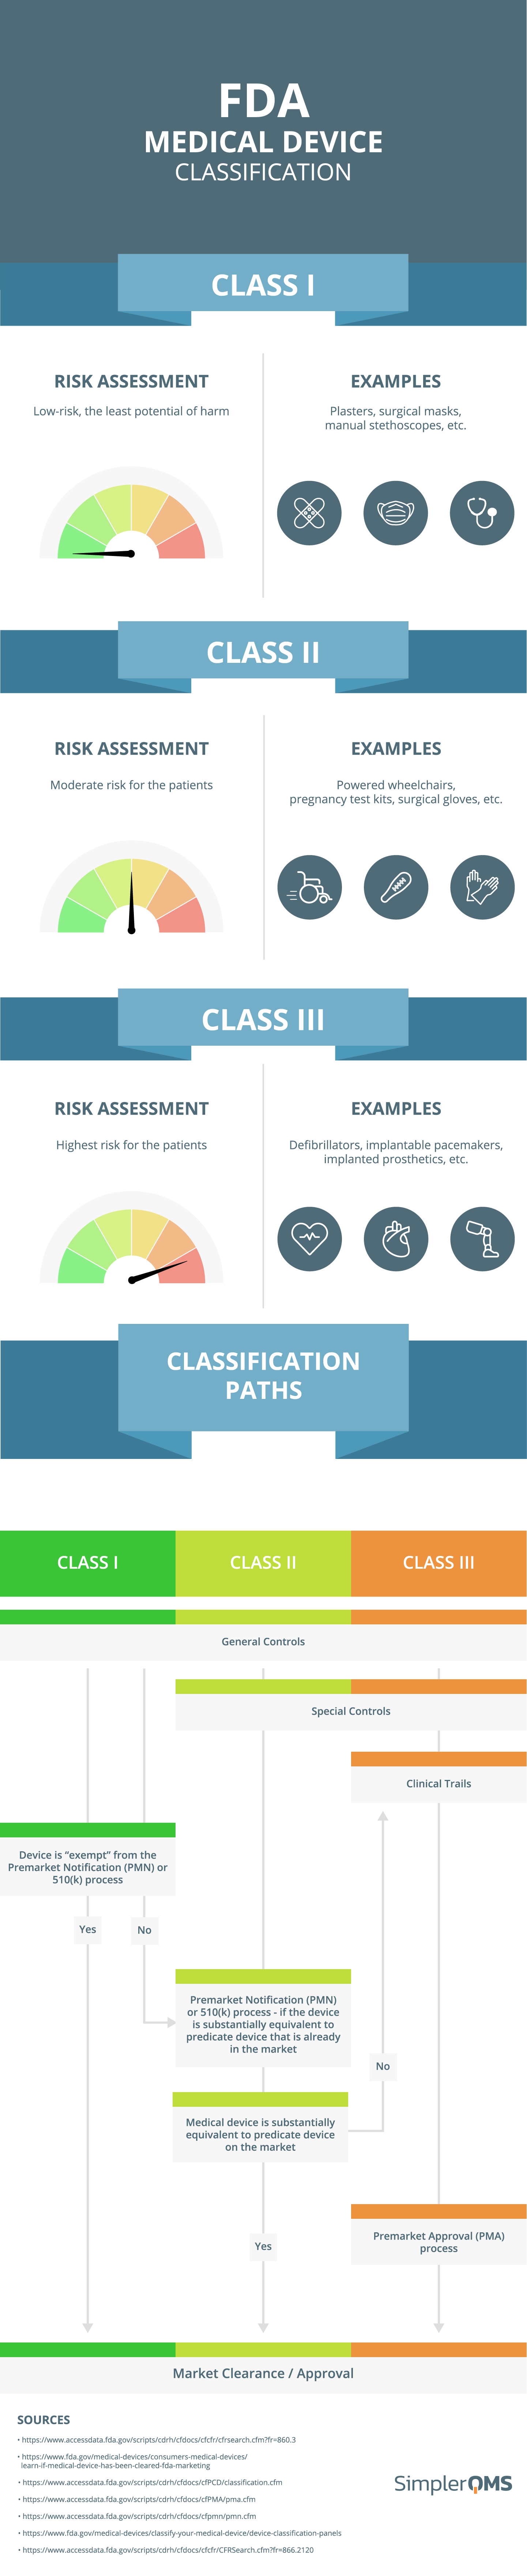 US FDA Medical Device Classification Infographic